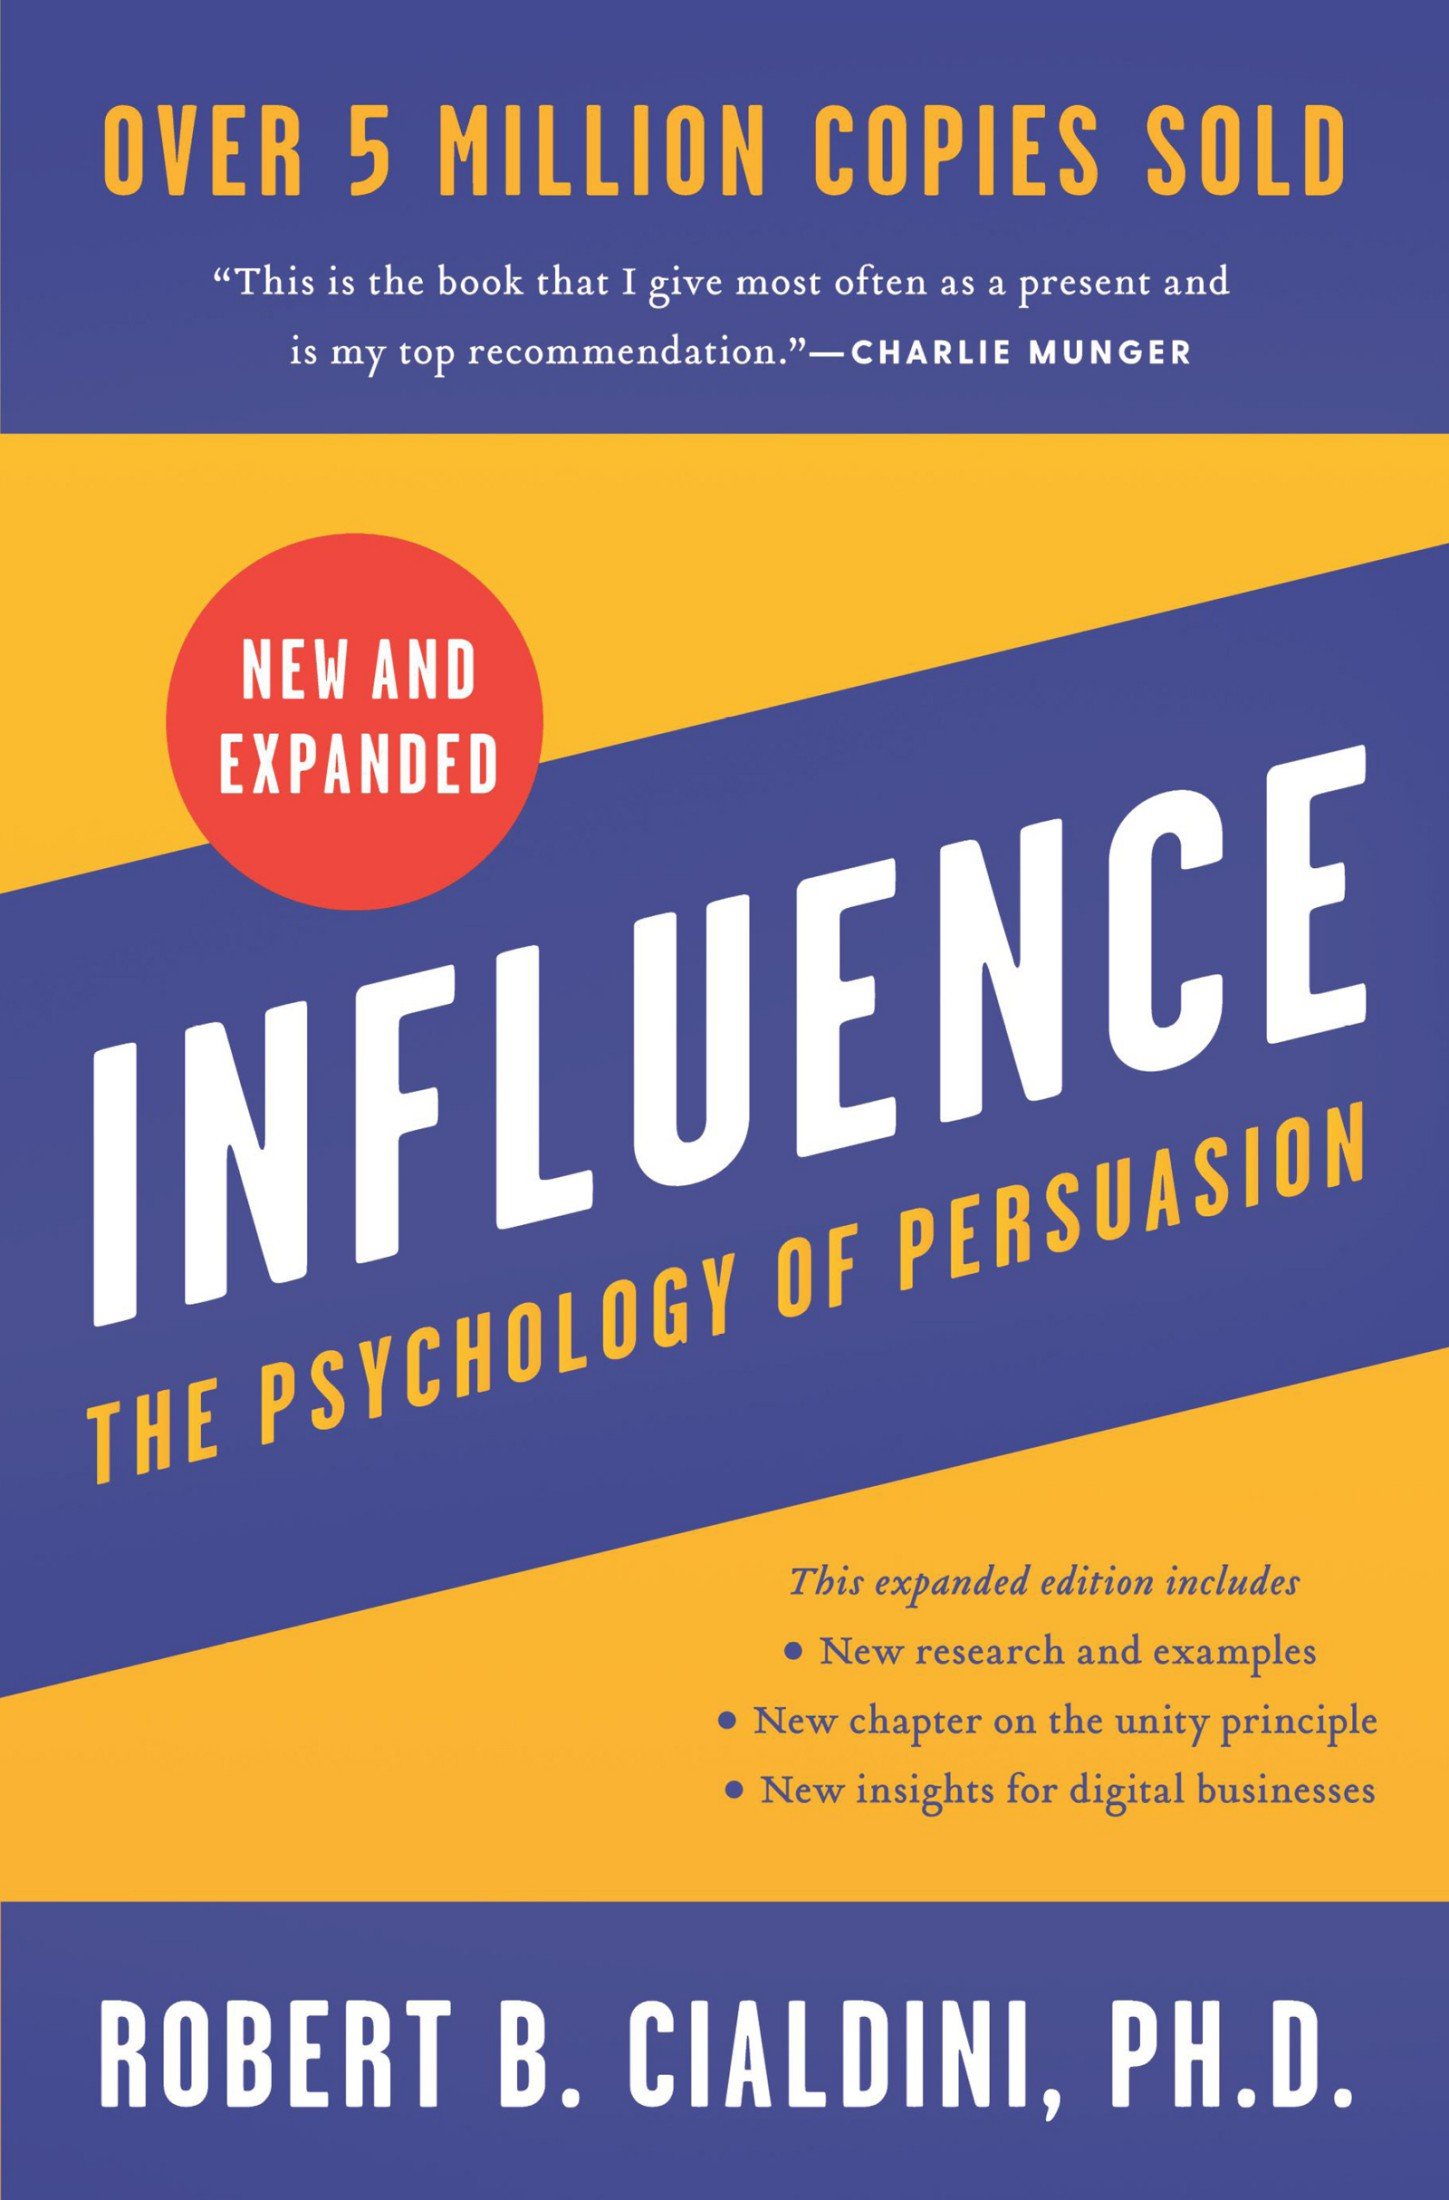 Influence, New and Expanded (2021, HarperCollins Publishers)